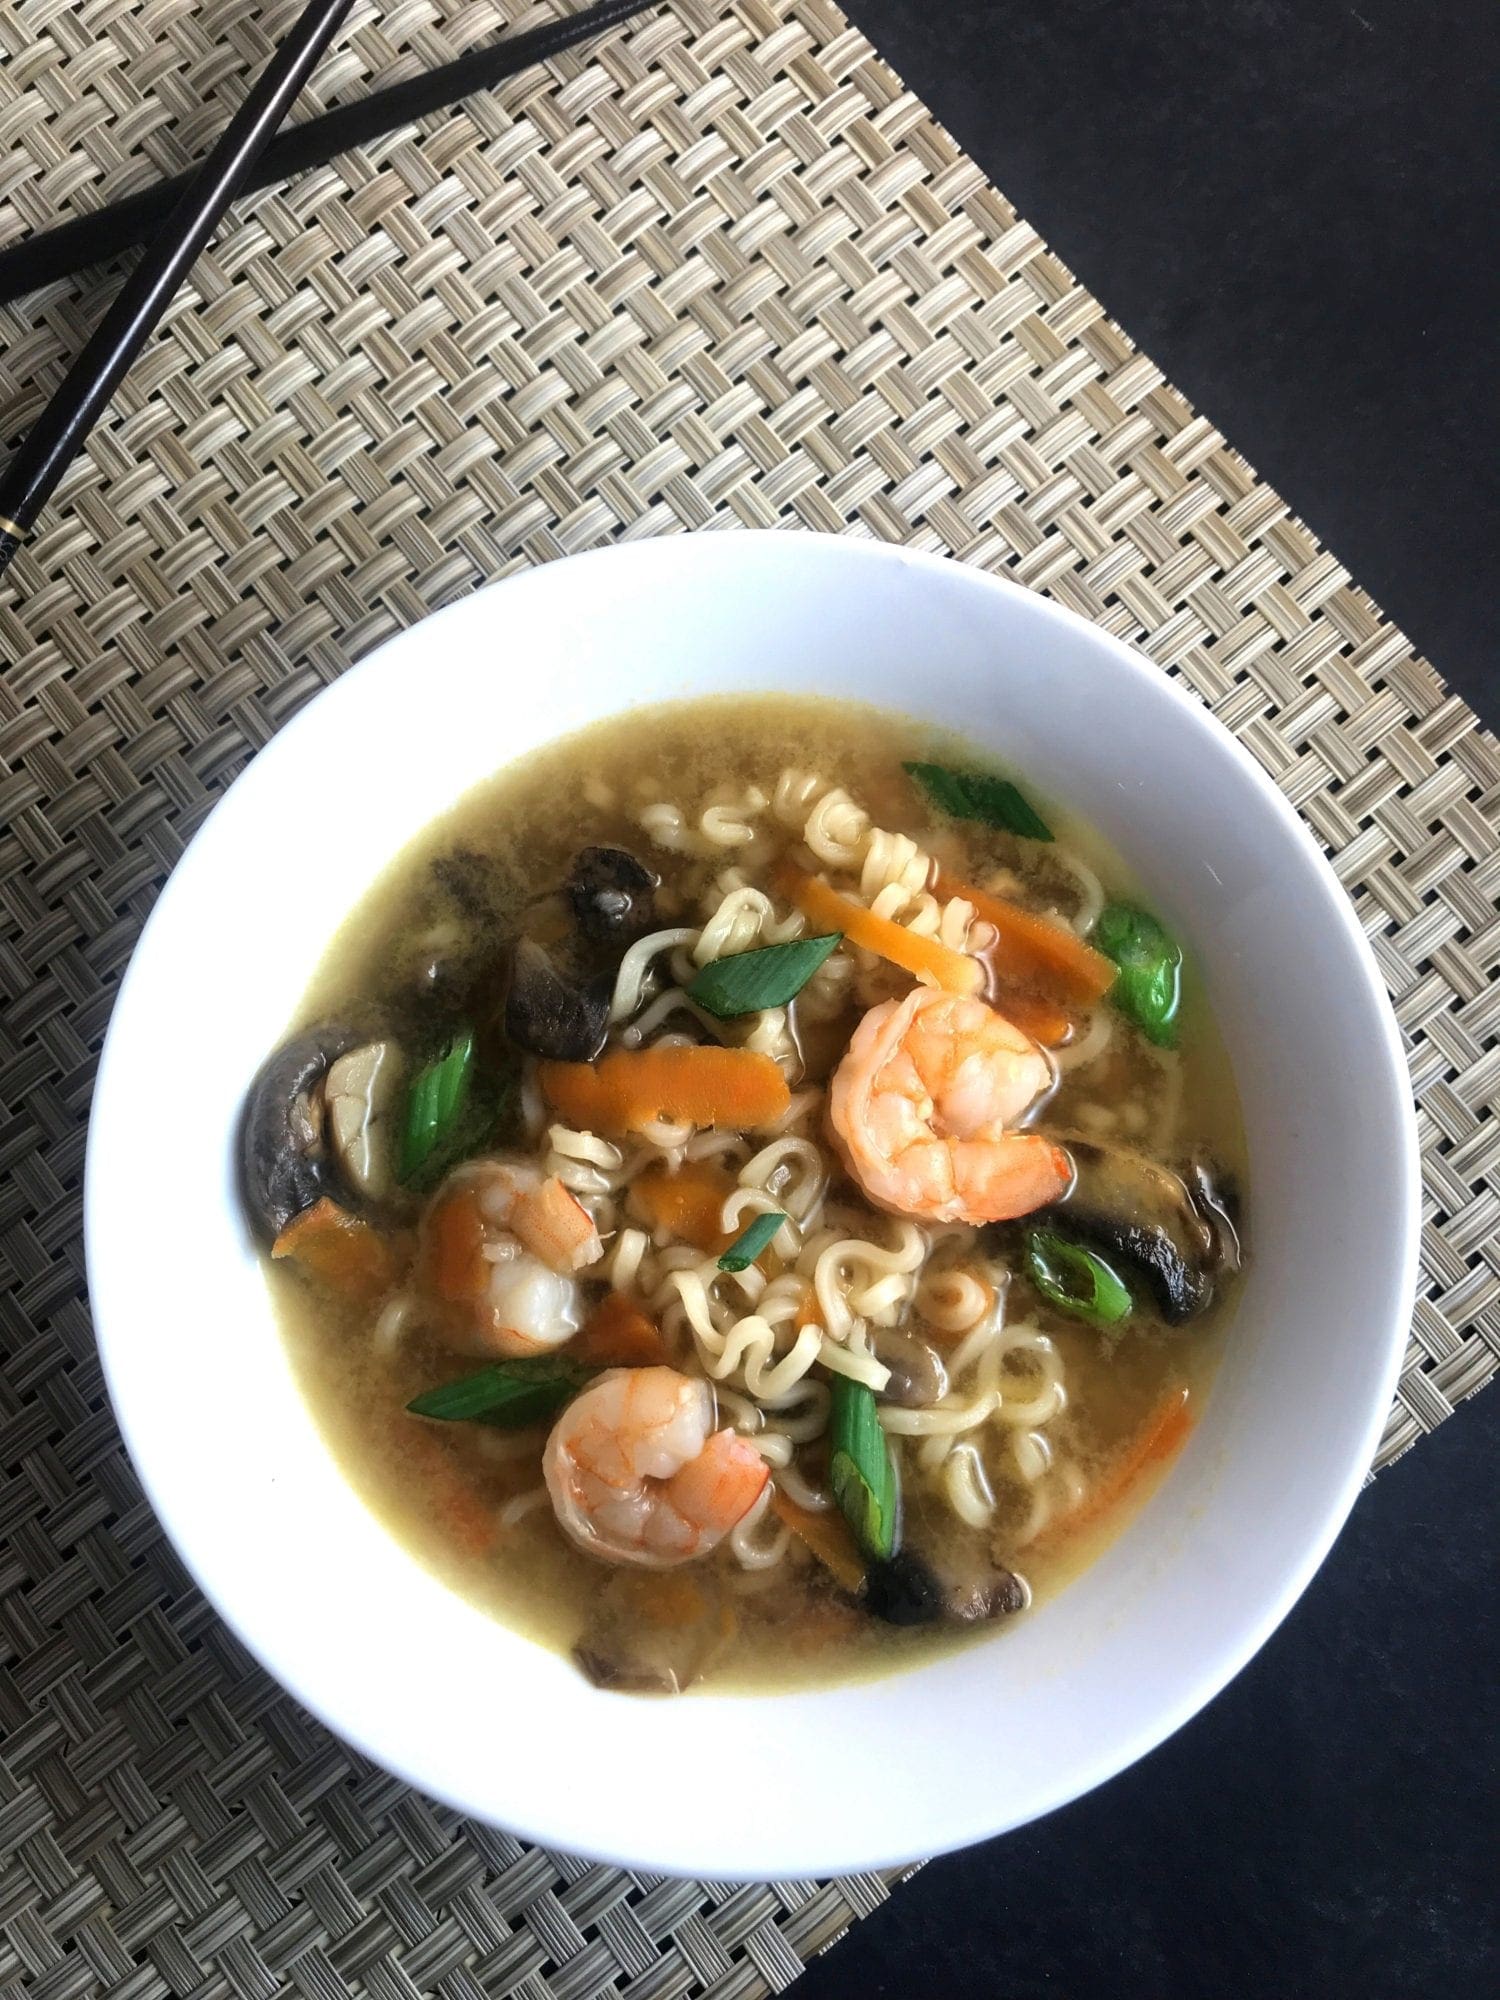 Shrimp, Ramen noodles, carrots, and mushrooms are cooked in a vegetable broth flavored with ginger and garlic in this simple Asian-style soup. Just 4 WW FreeStyle SmartPoints per serving.